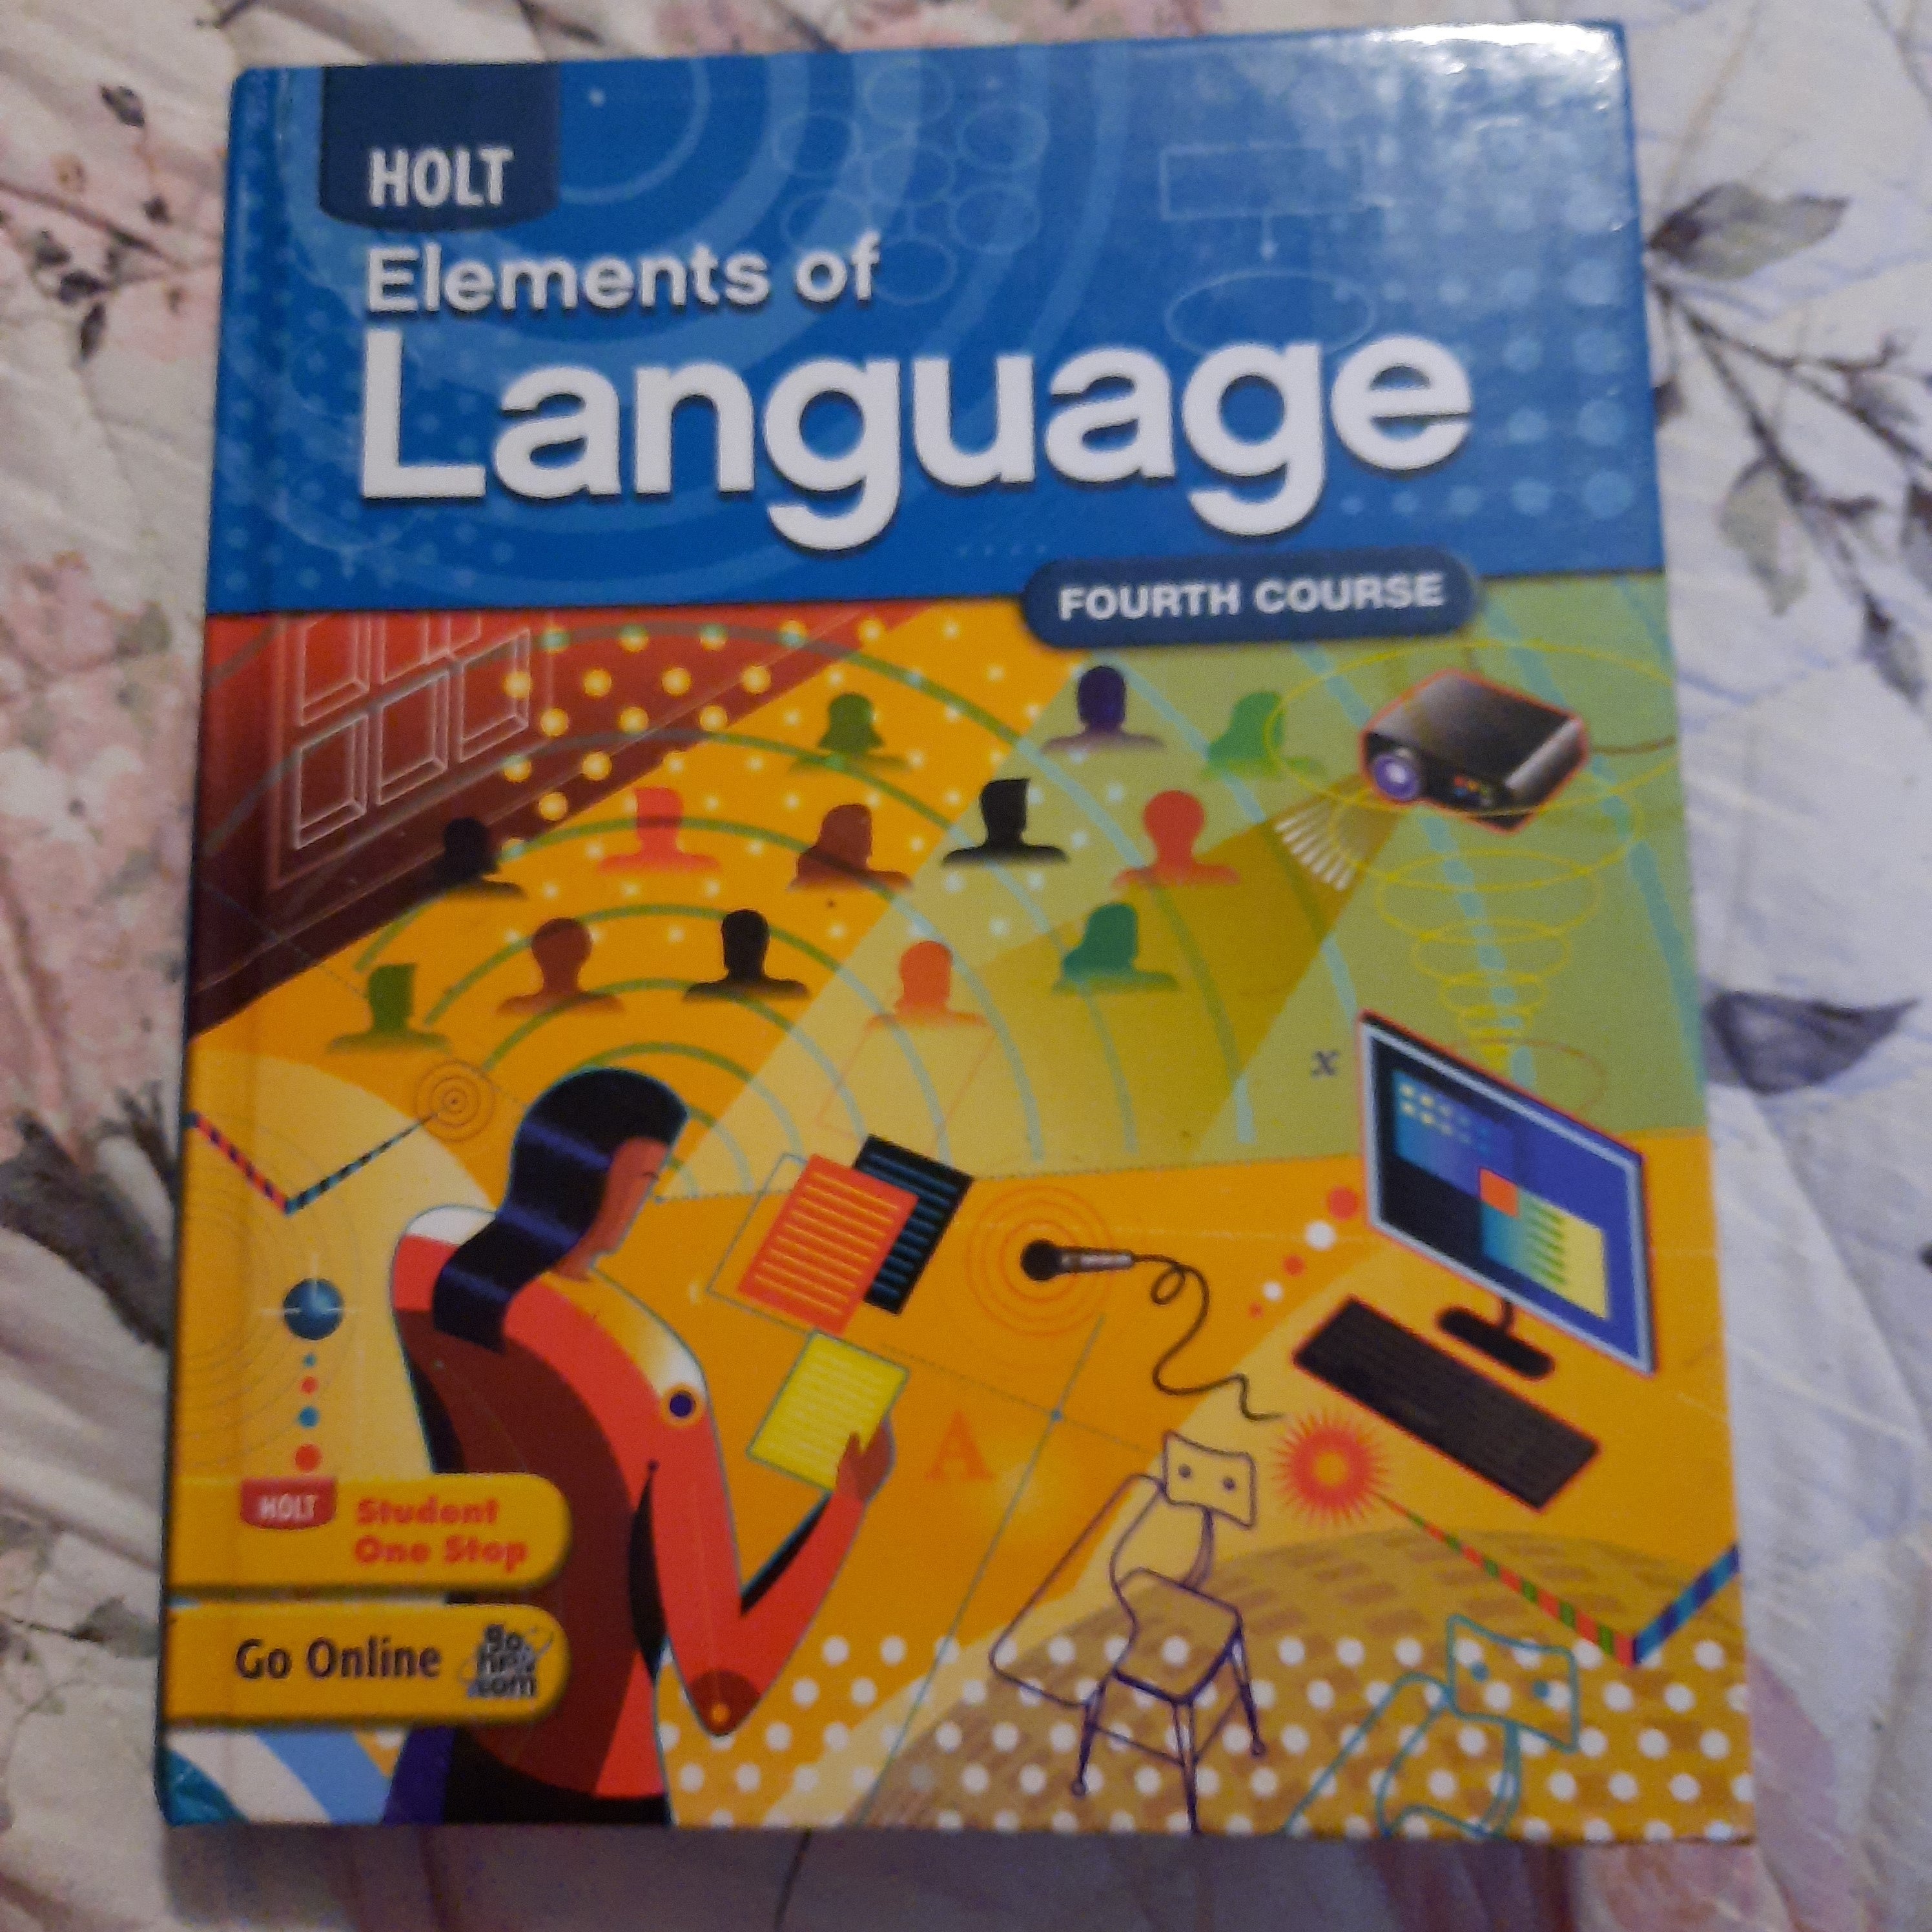 Language　Pangobooks　Hobbs,　Fourth　Vacca　Course　by　O'Dell　Irvin　Hardcover　Elements　of